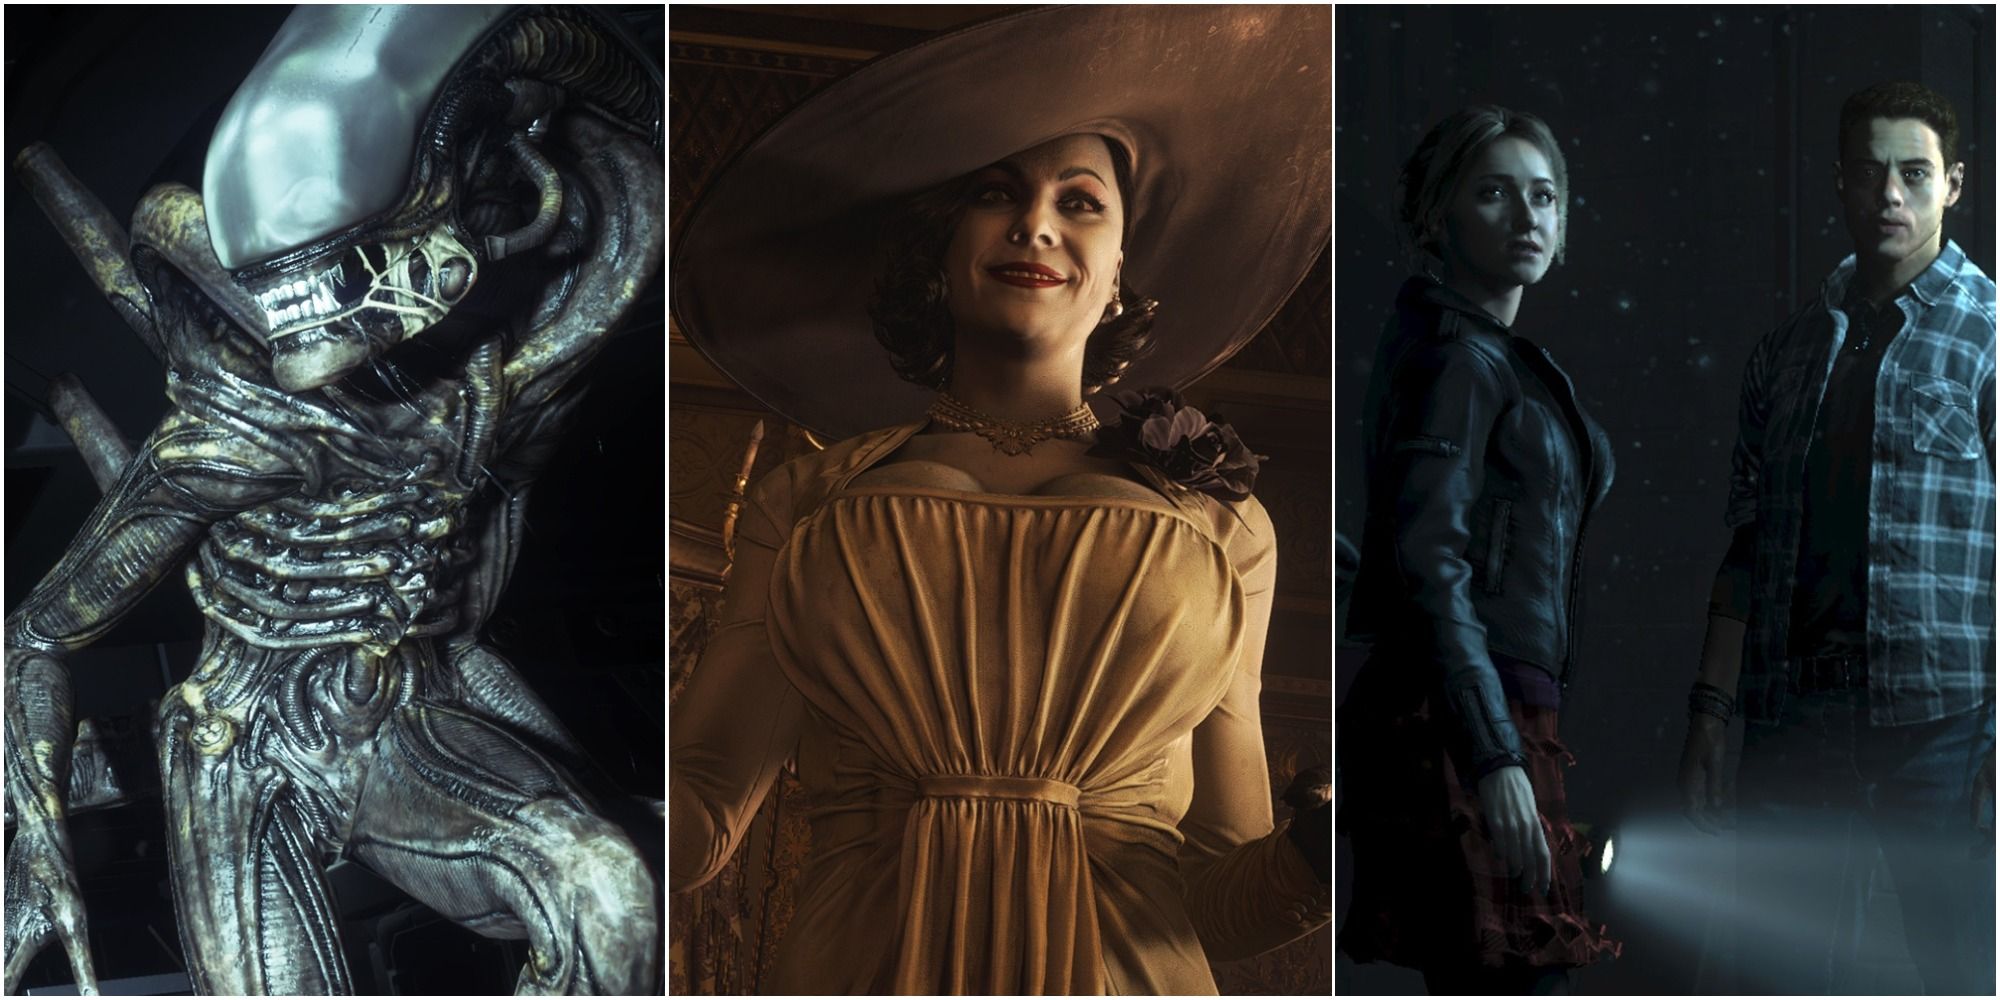 Split image of the Xenomorph from Alien: Isolation, Lady Dimitrescu from Resident Evil Village, and Sam and Josh from Until Dawn